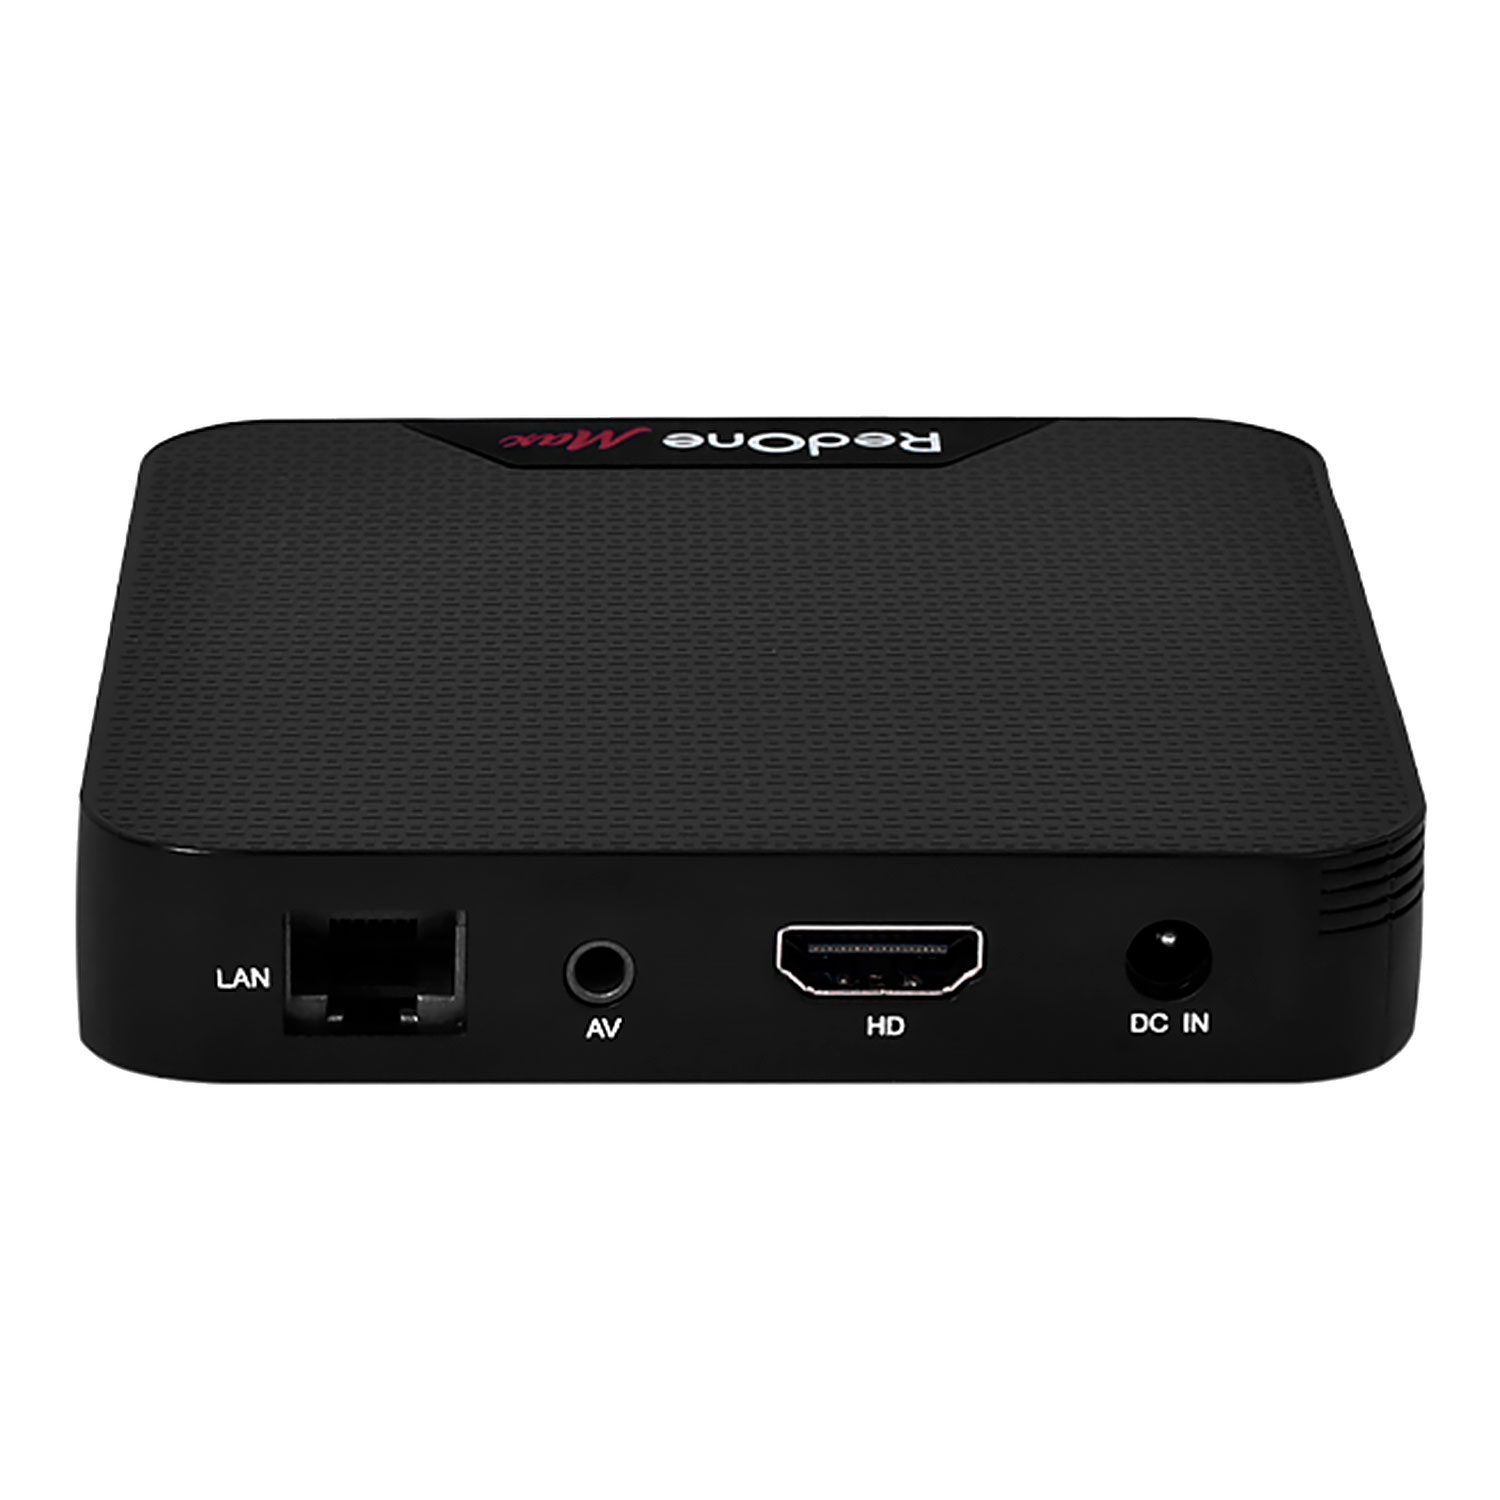 Receptor Red One Max 2GB RAM / 8GB / Wifi / 4K / Android 10 - Preto